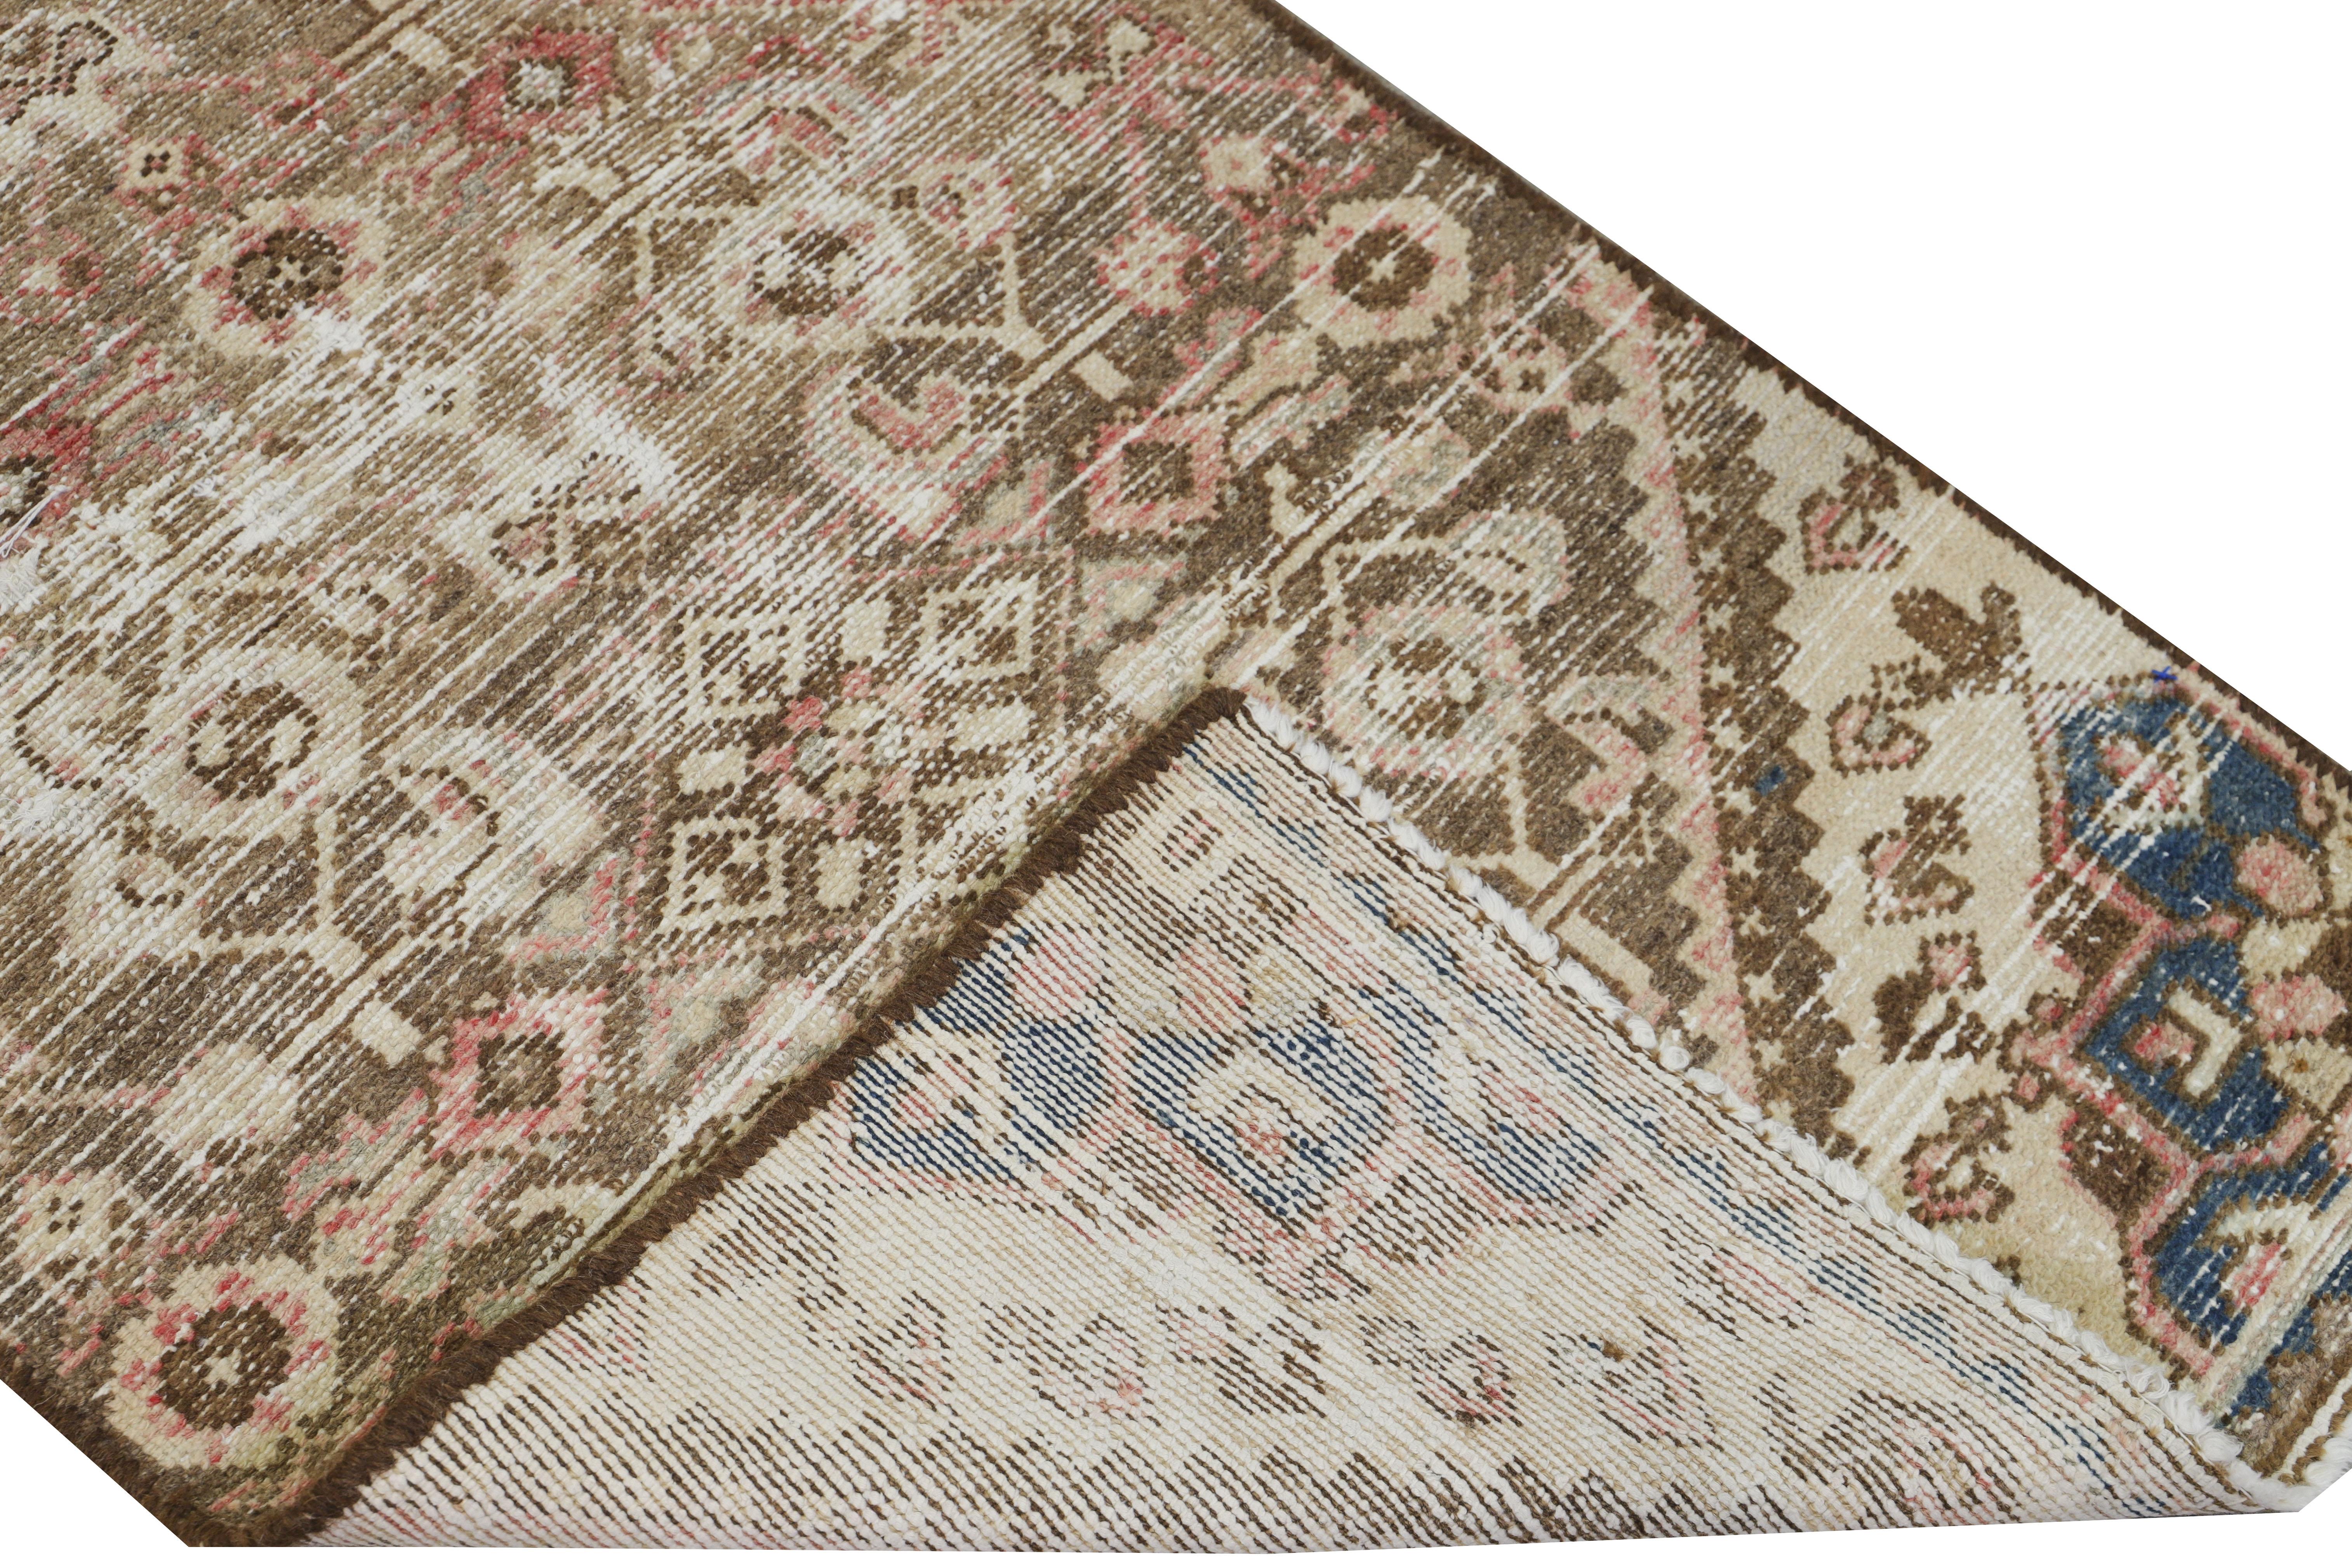 Beautiful Vintage Malayer hand-knotted wool runner with a brown field. This Malayer rug has a beige and pink accent of rust in an all-over gorgeous geometric medallion floral pattern design.

This rug measures: 2'2